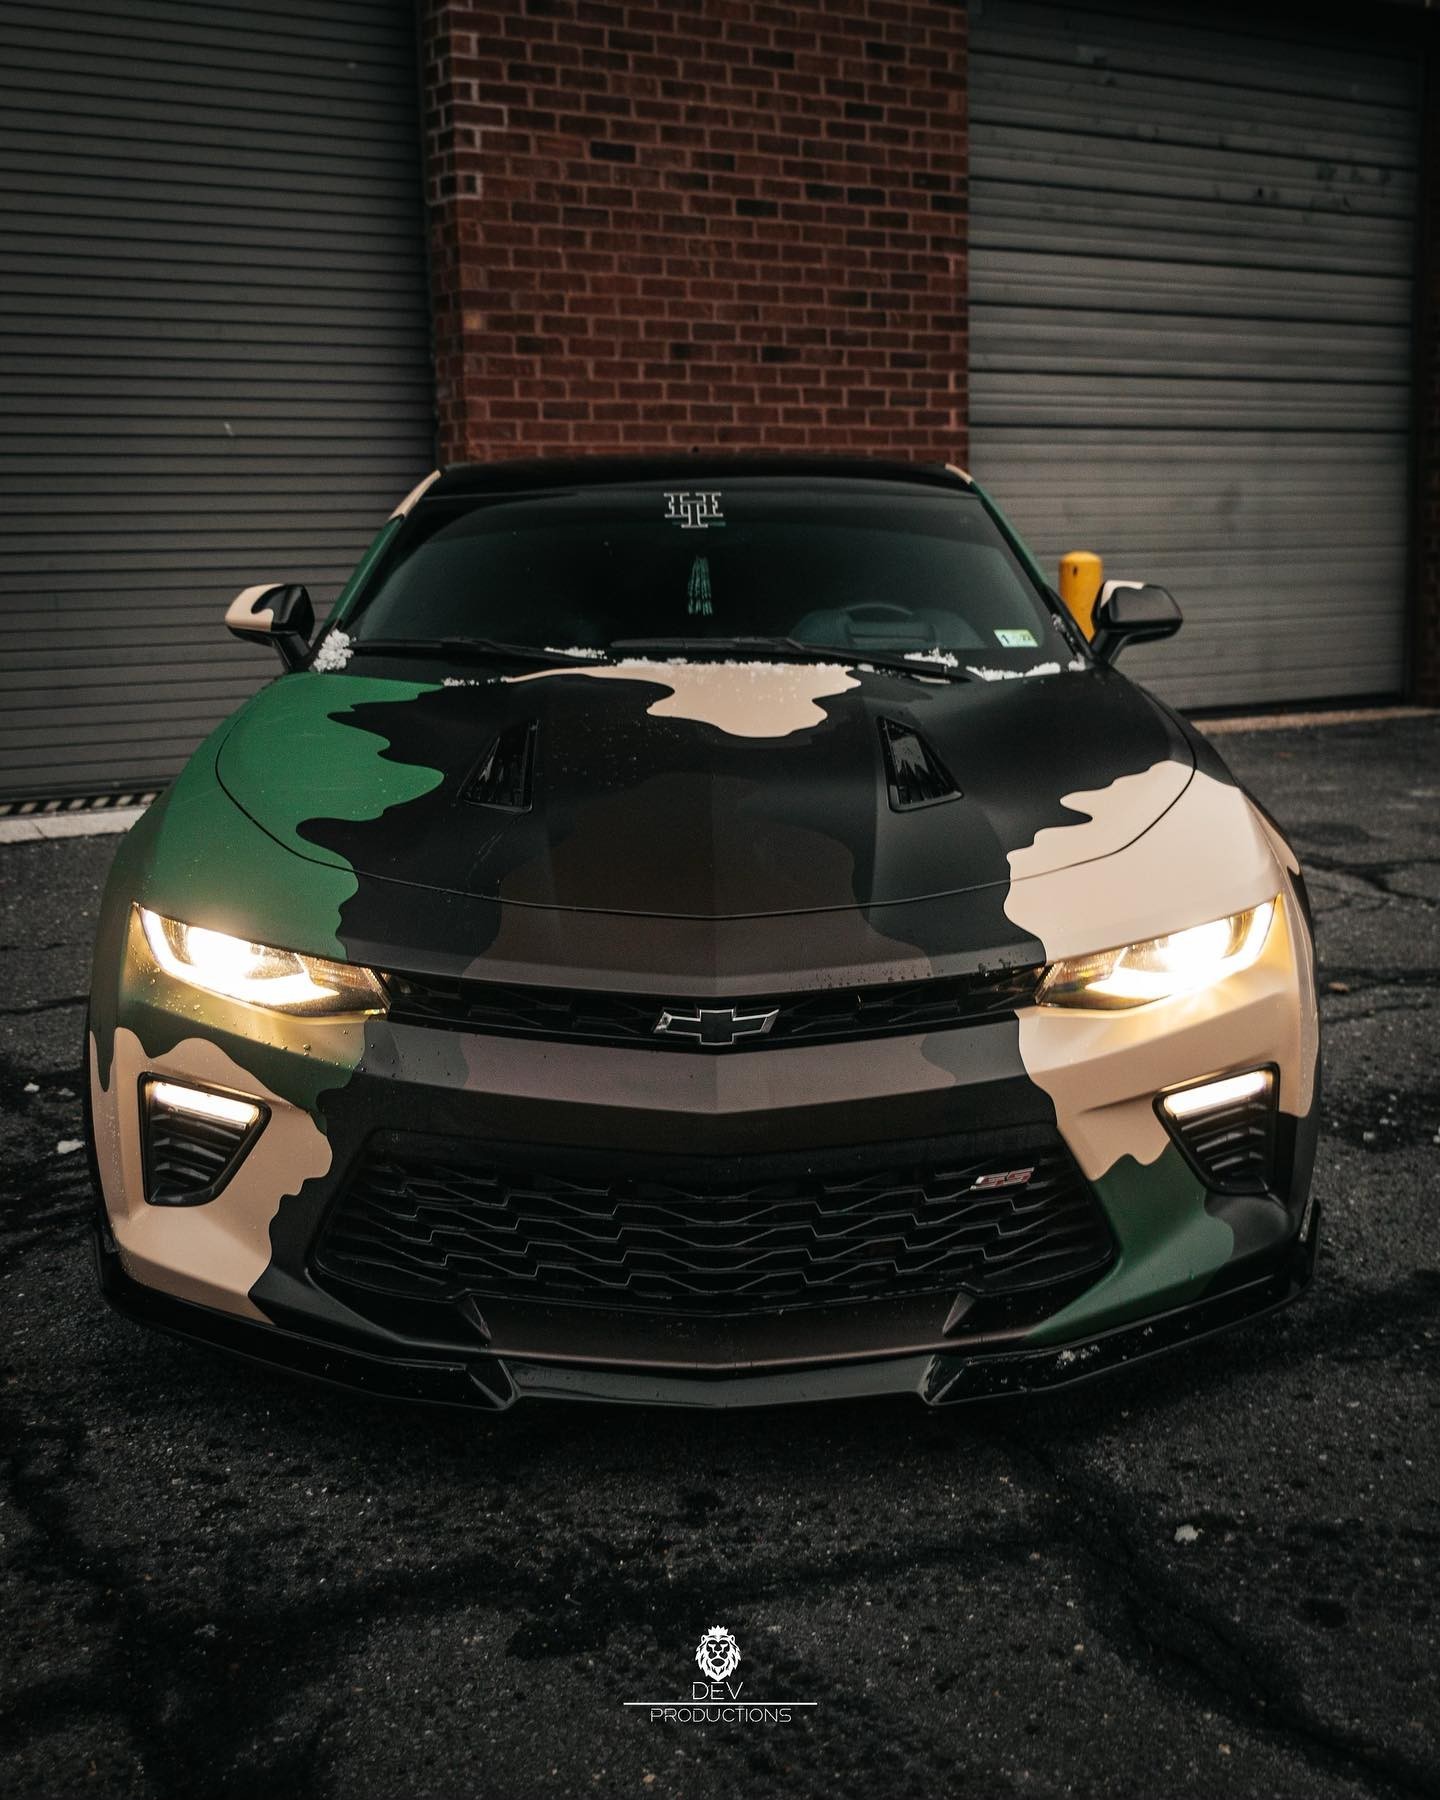 This Gucci wrapped camaro #chevy #camaro #cars #gucci #bagged